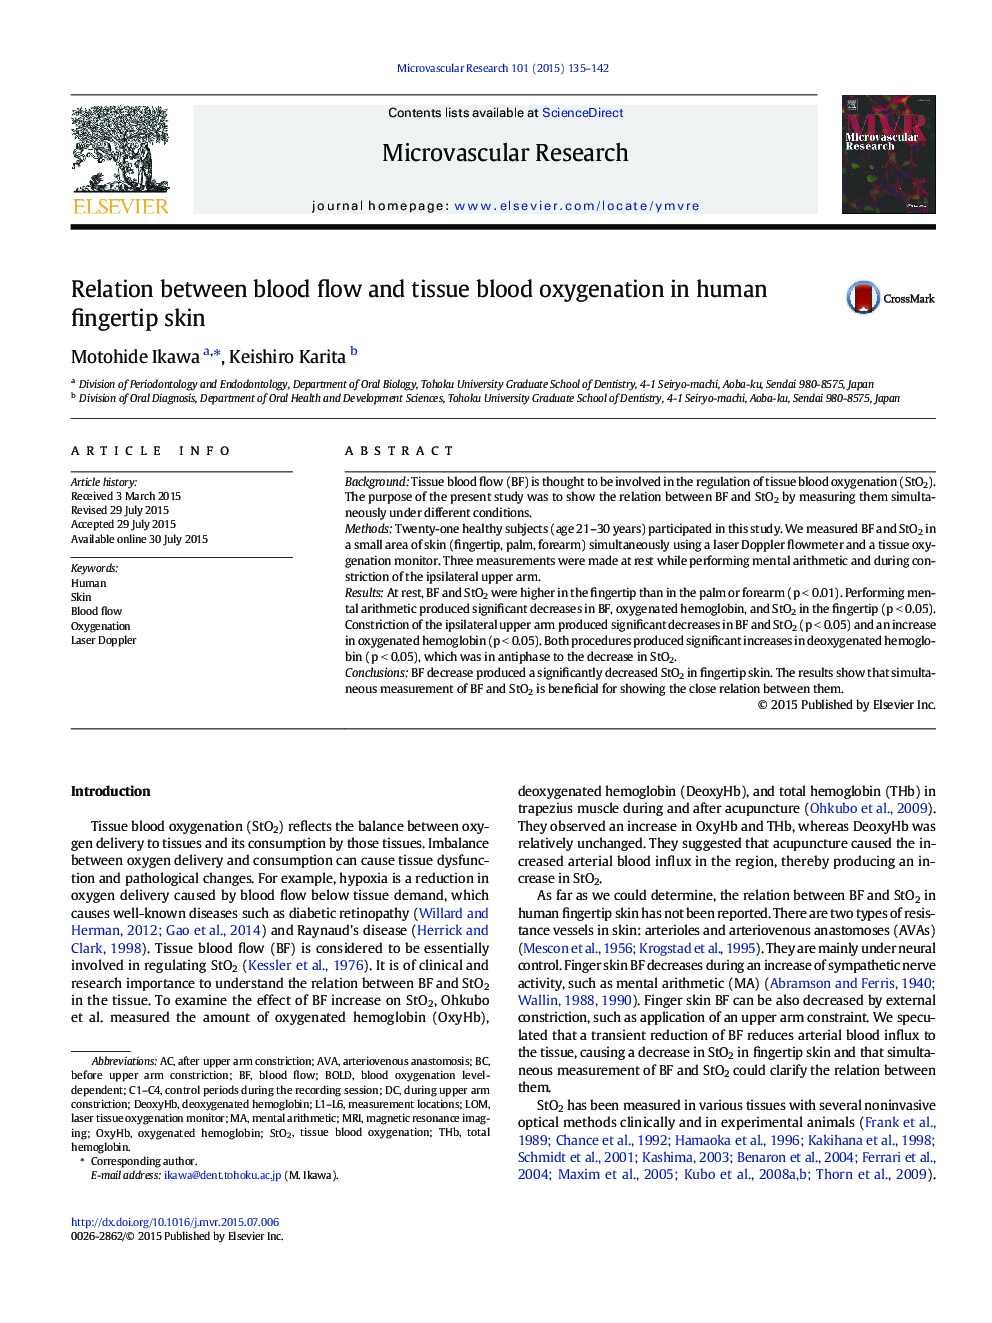 Relation between blood flow and tissue blood oxygenation in human fingertip skin